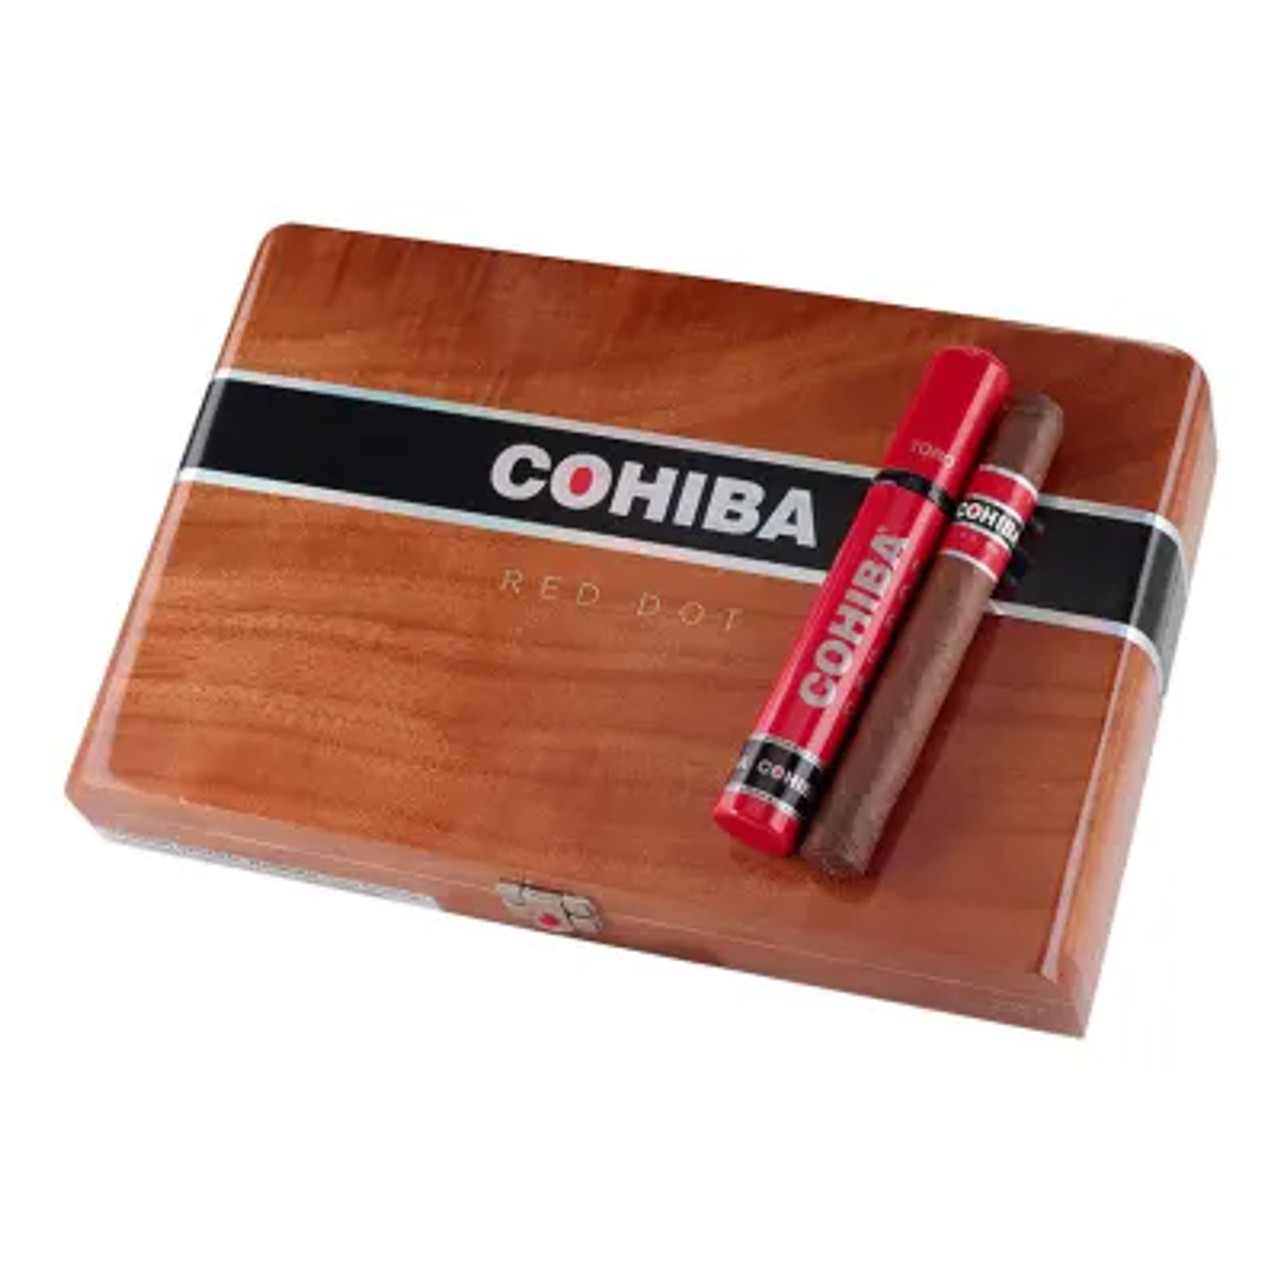 Fortrolig Overskrift Siege Cohiba Red Dot Toro Tube cigars at Discount prices